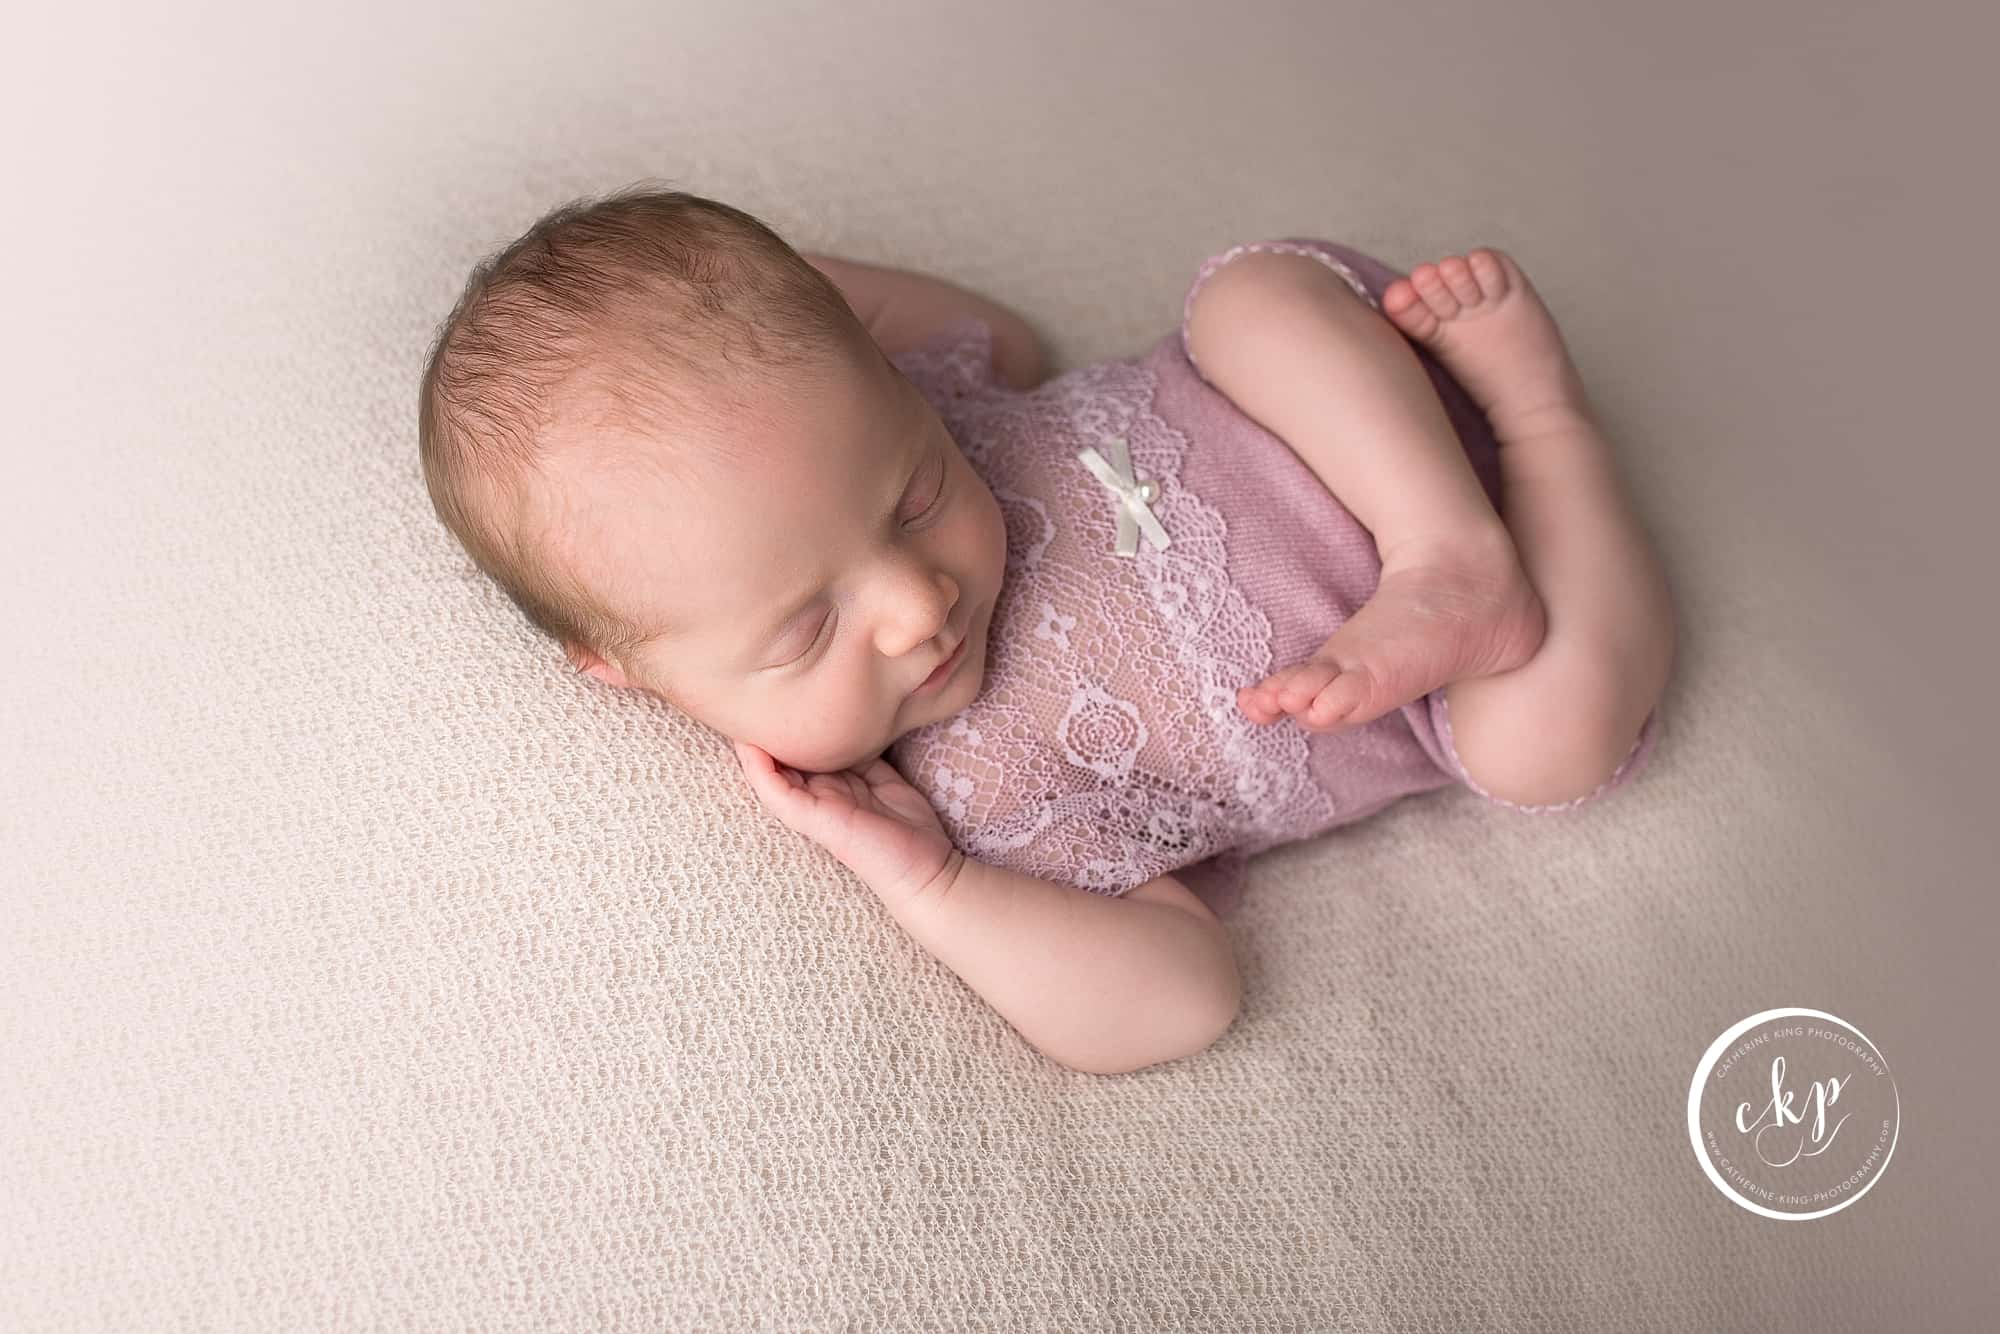 Newborn baby girl twin photography session with CKP a madison ct newborn photography